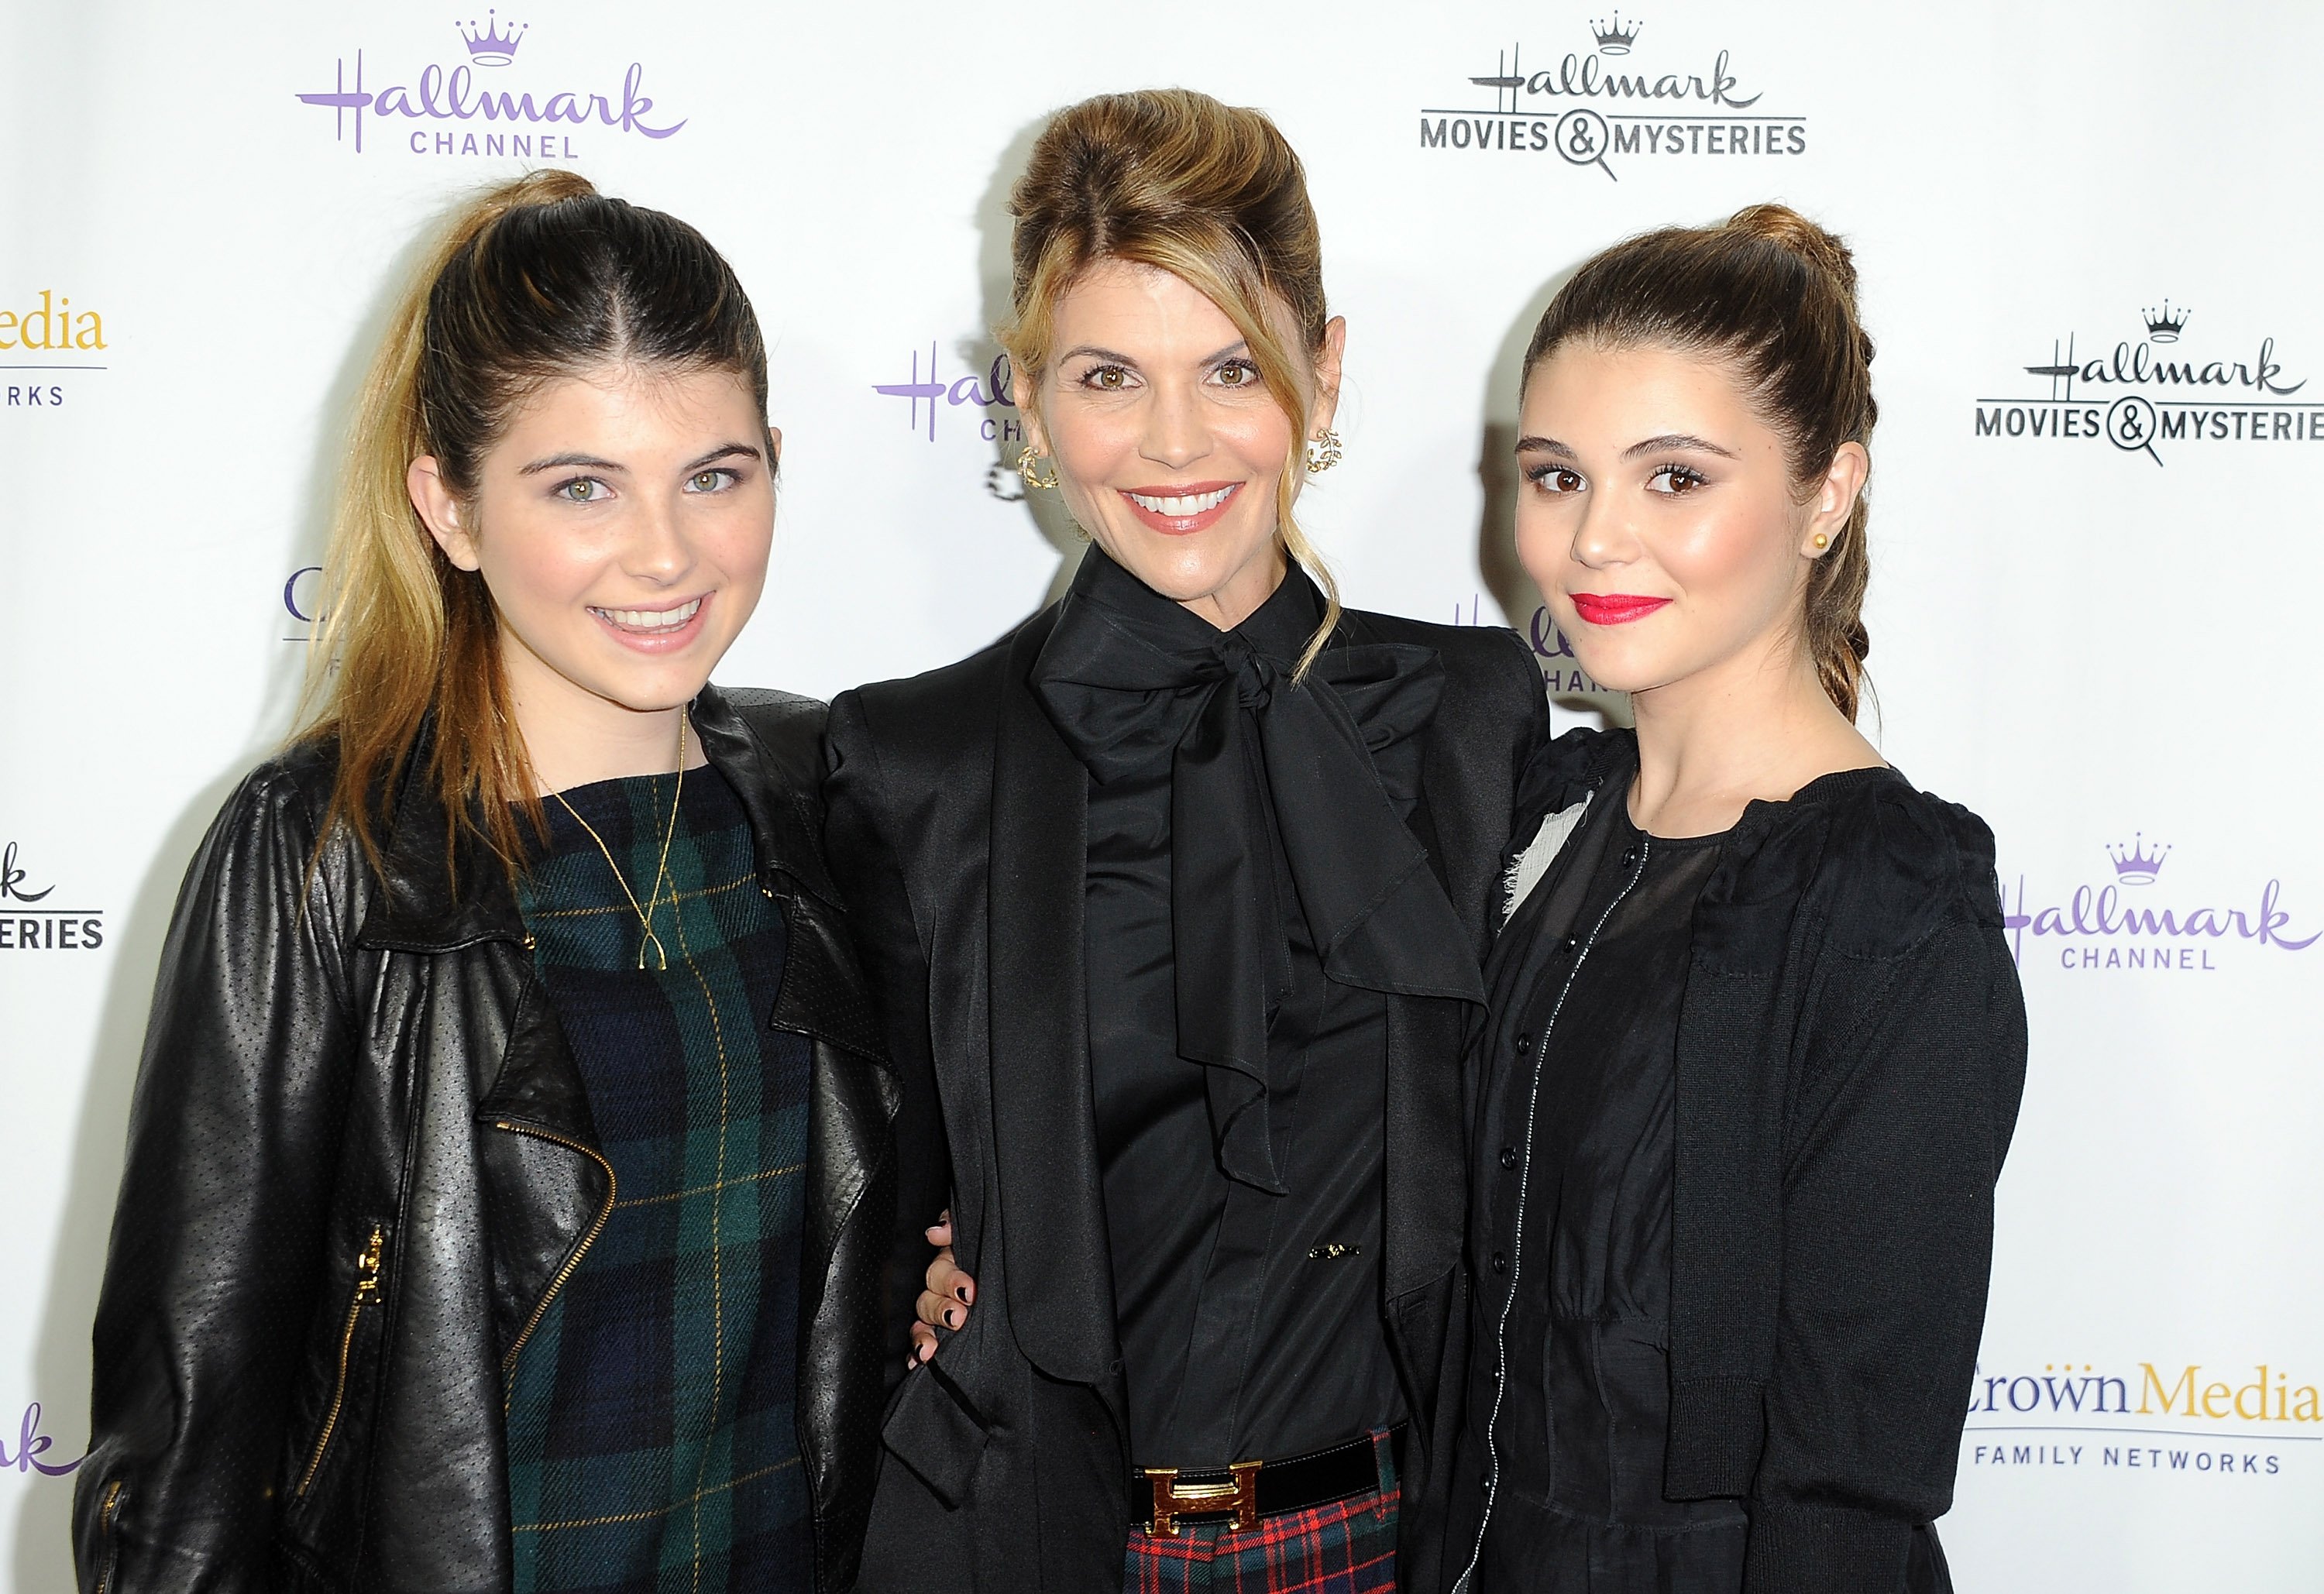 Actress Lori Loughlin and her daughters Isabella Giannulli and Olivia Giannulli at Hallmark Channel's annual holiday event | Source: Getty Images